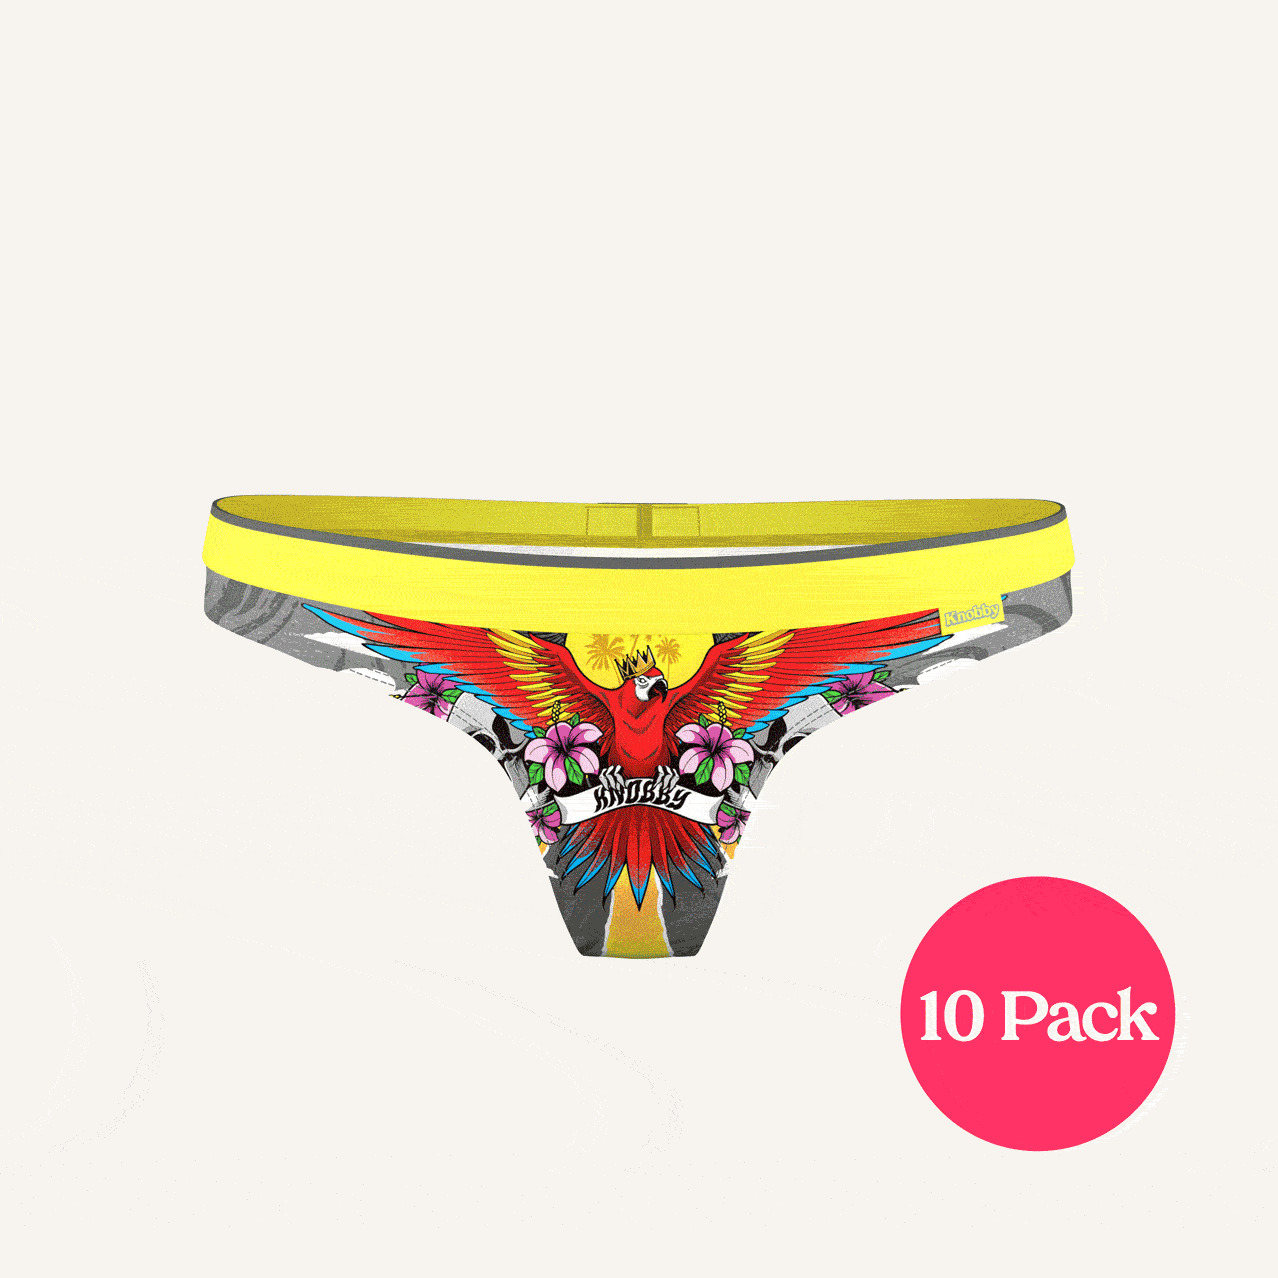 Buy Mystery Underwear Packs, Save up to 50%